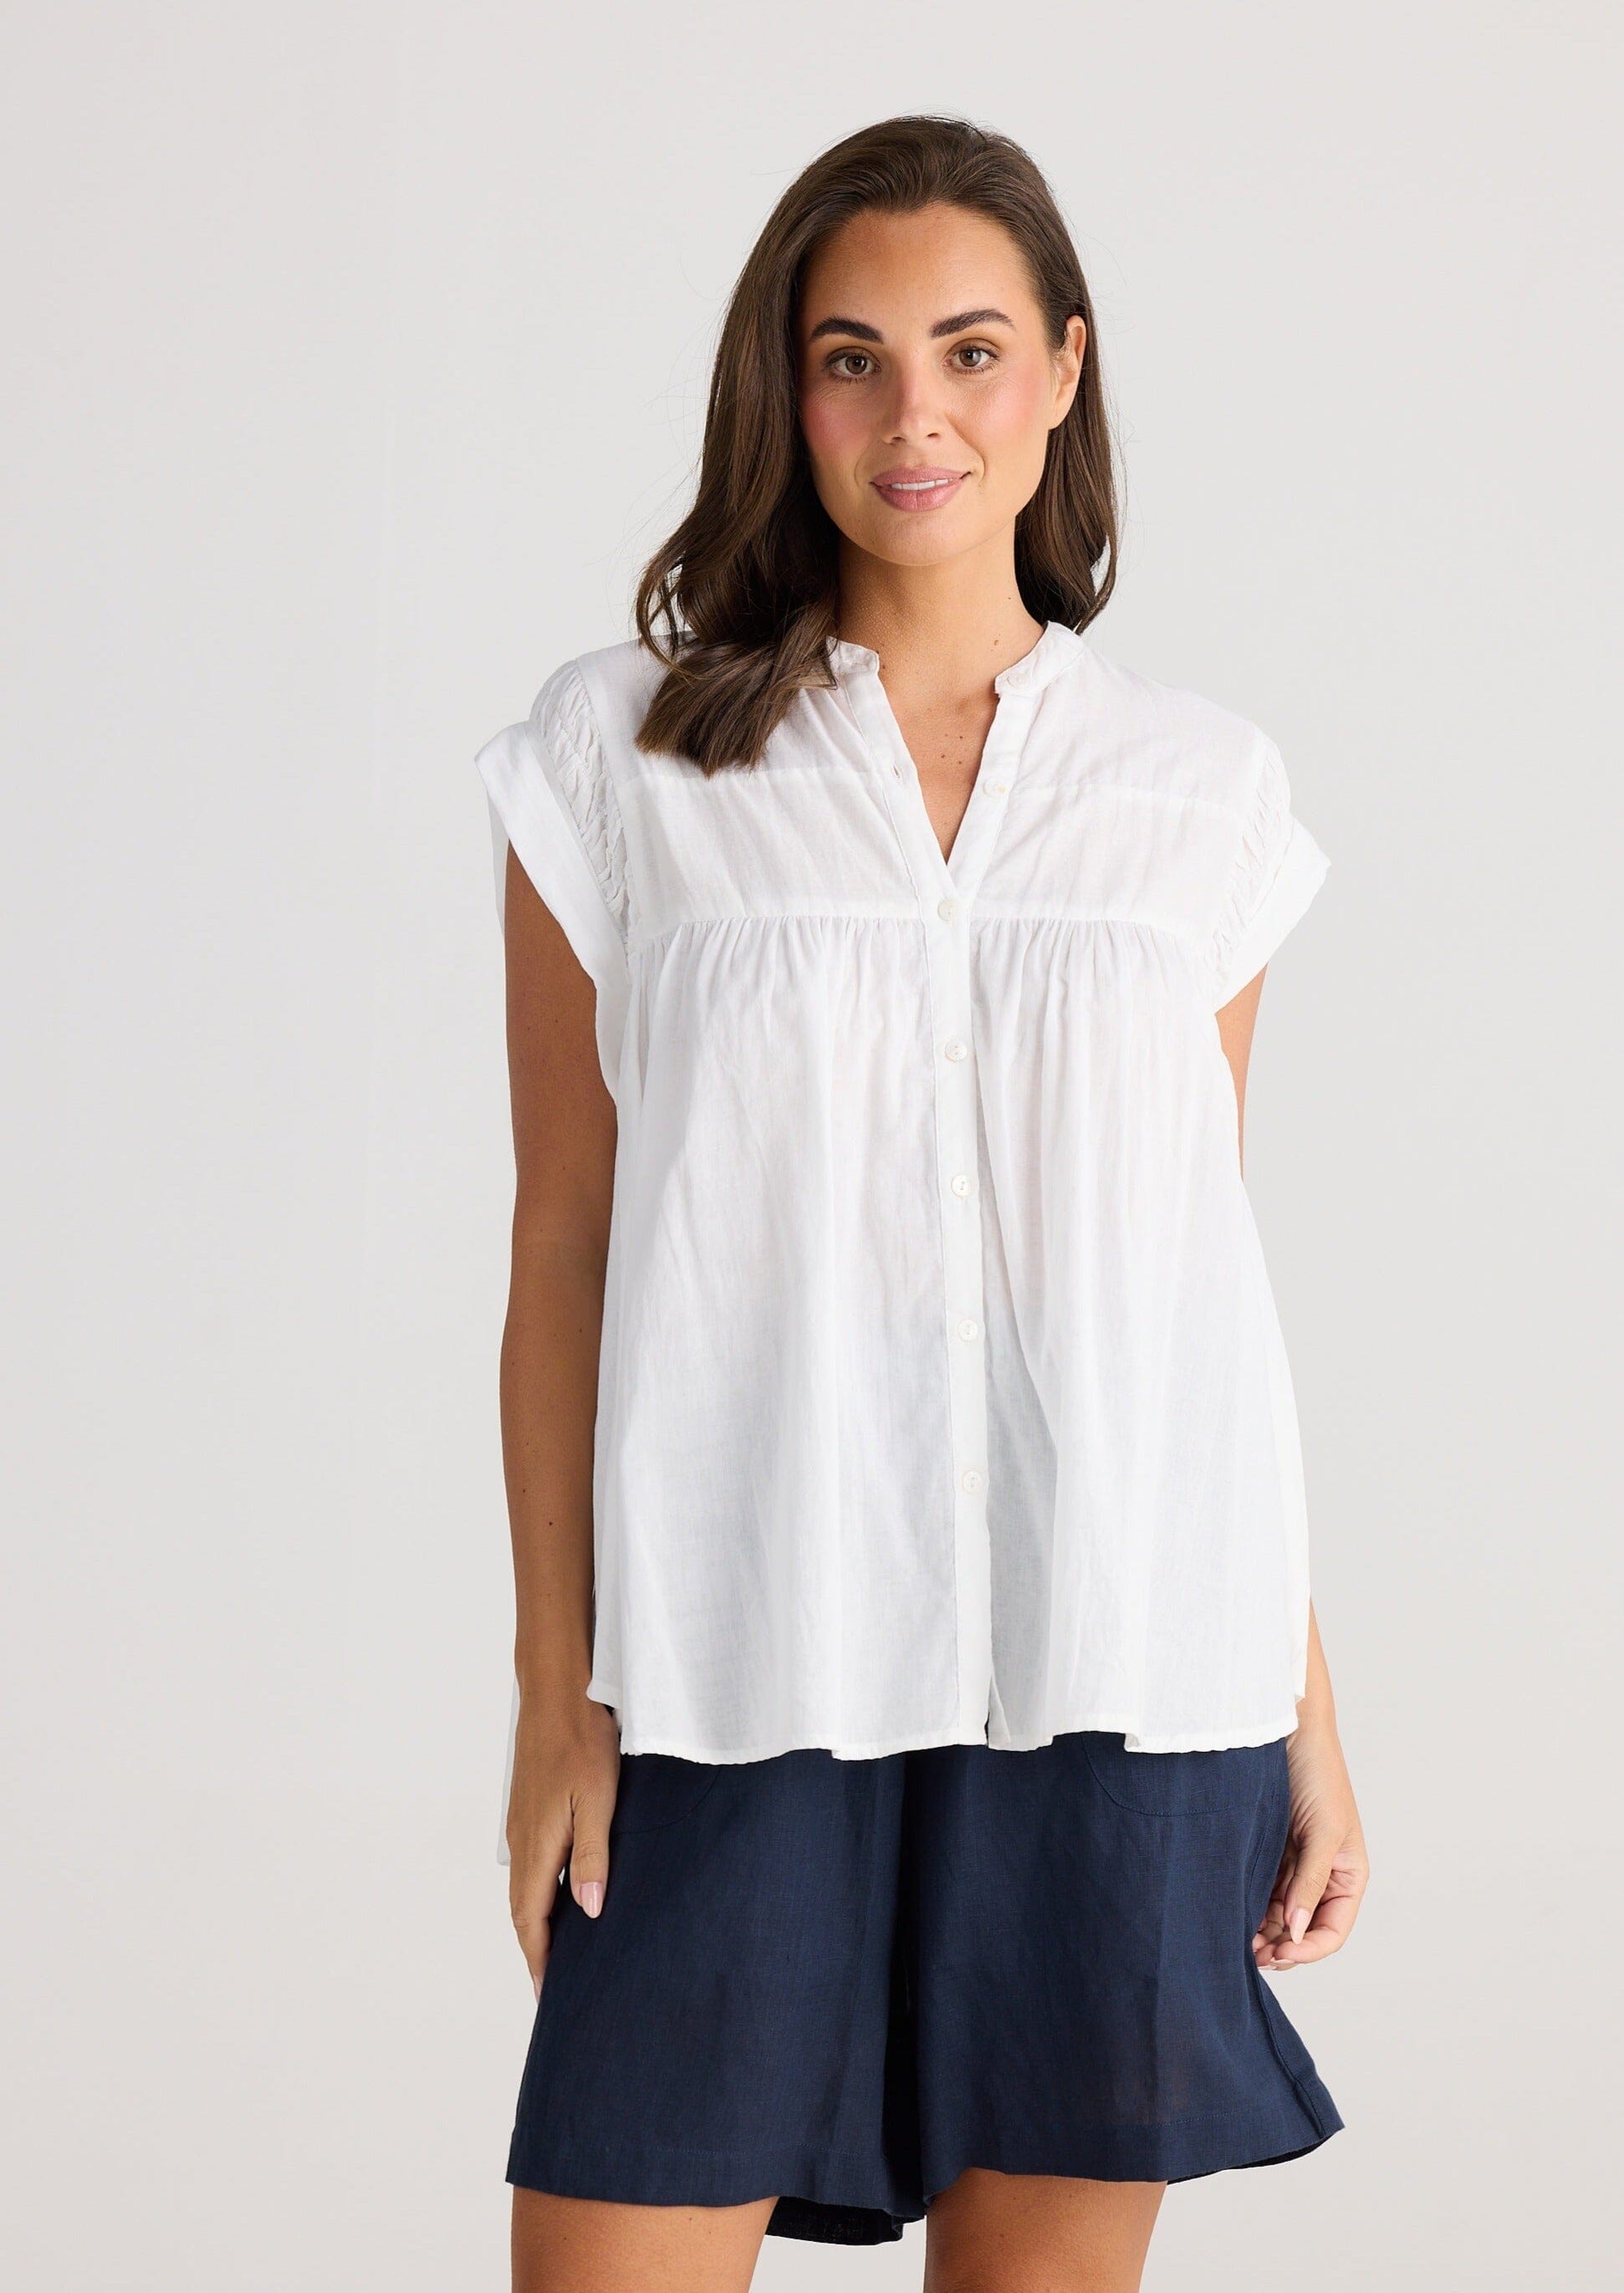 Clementine Top-White Top Holiday 